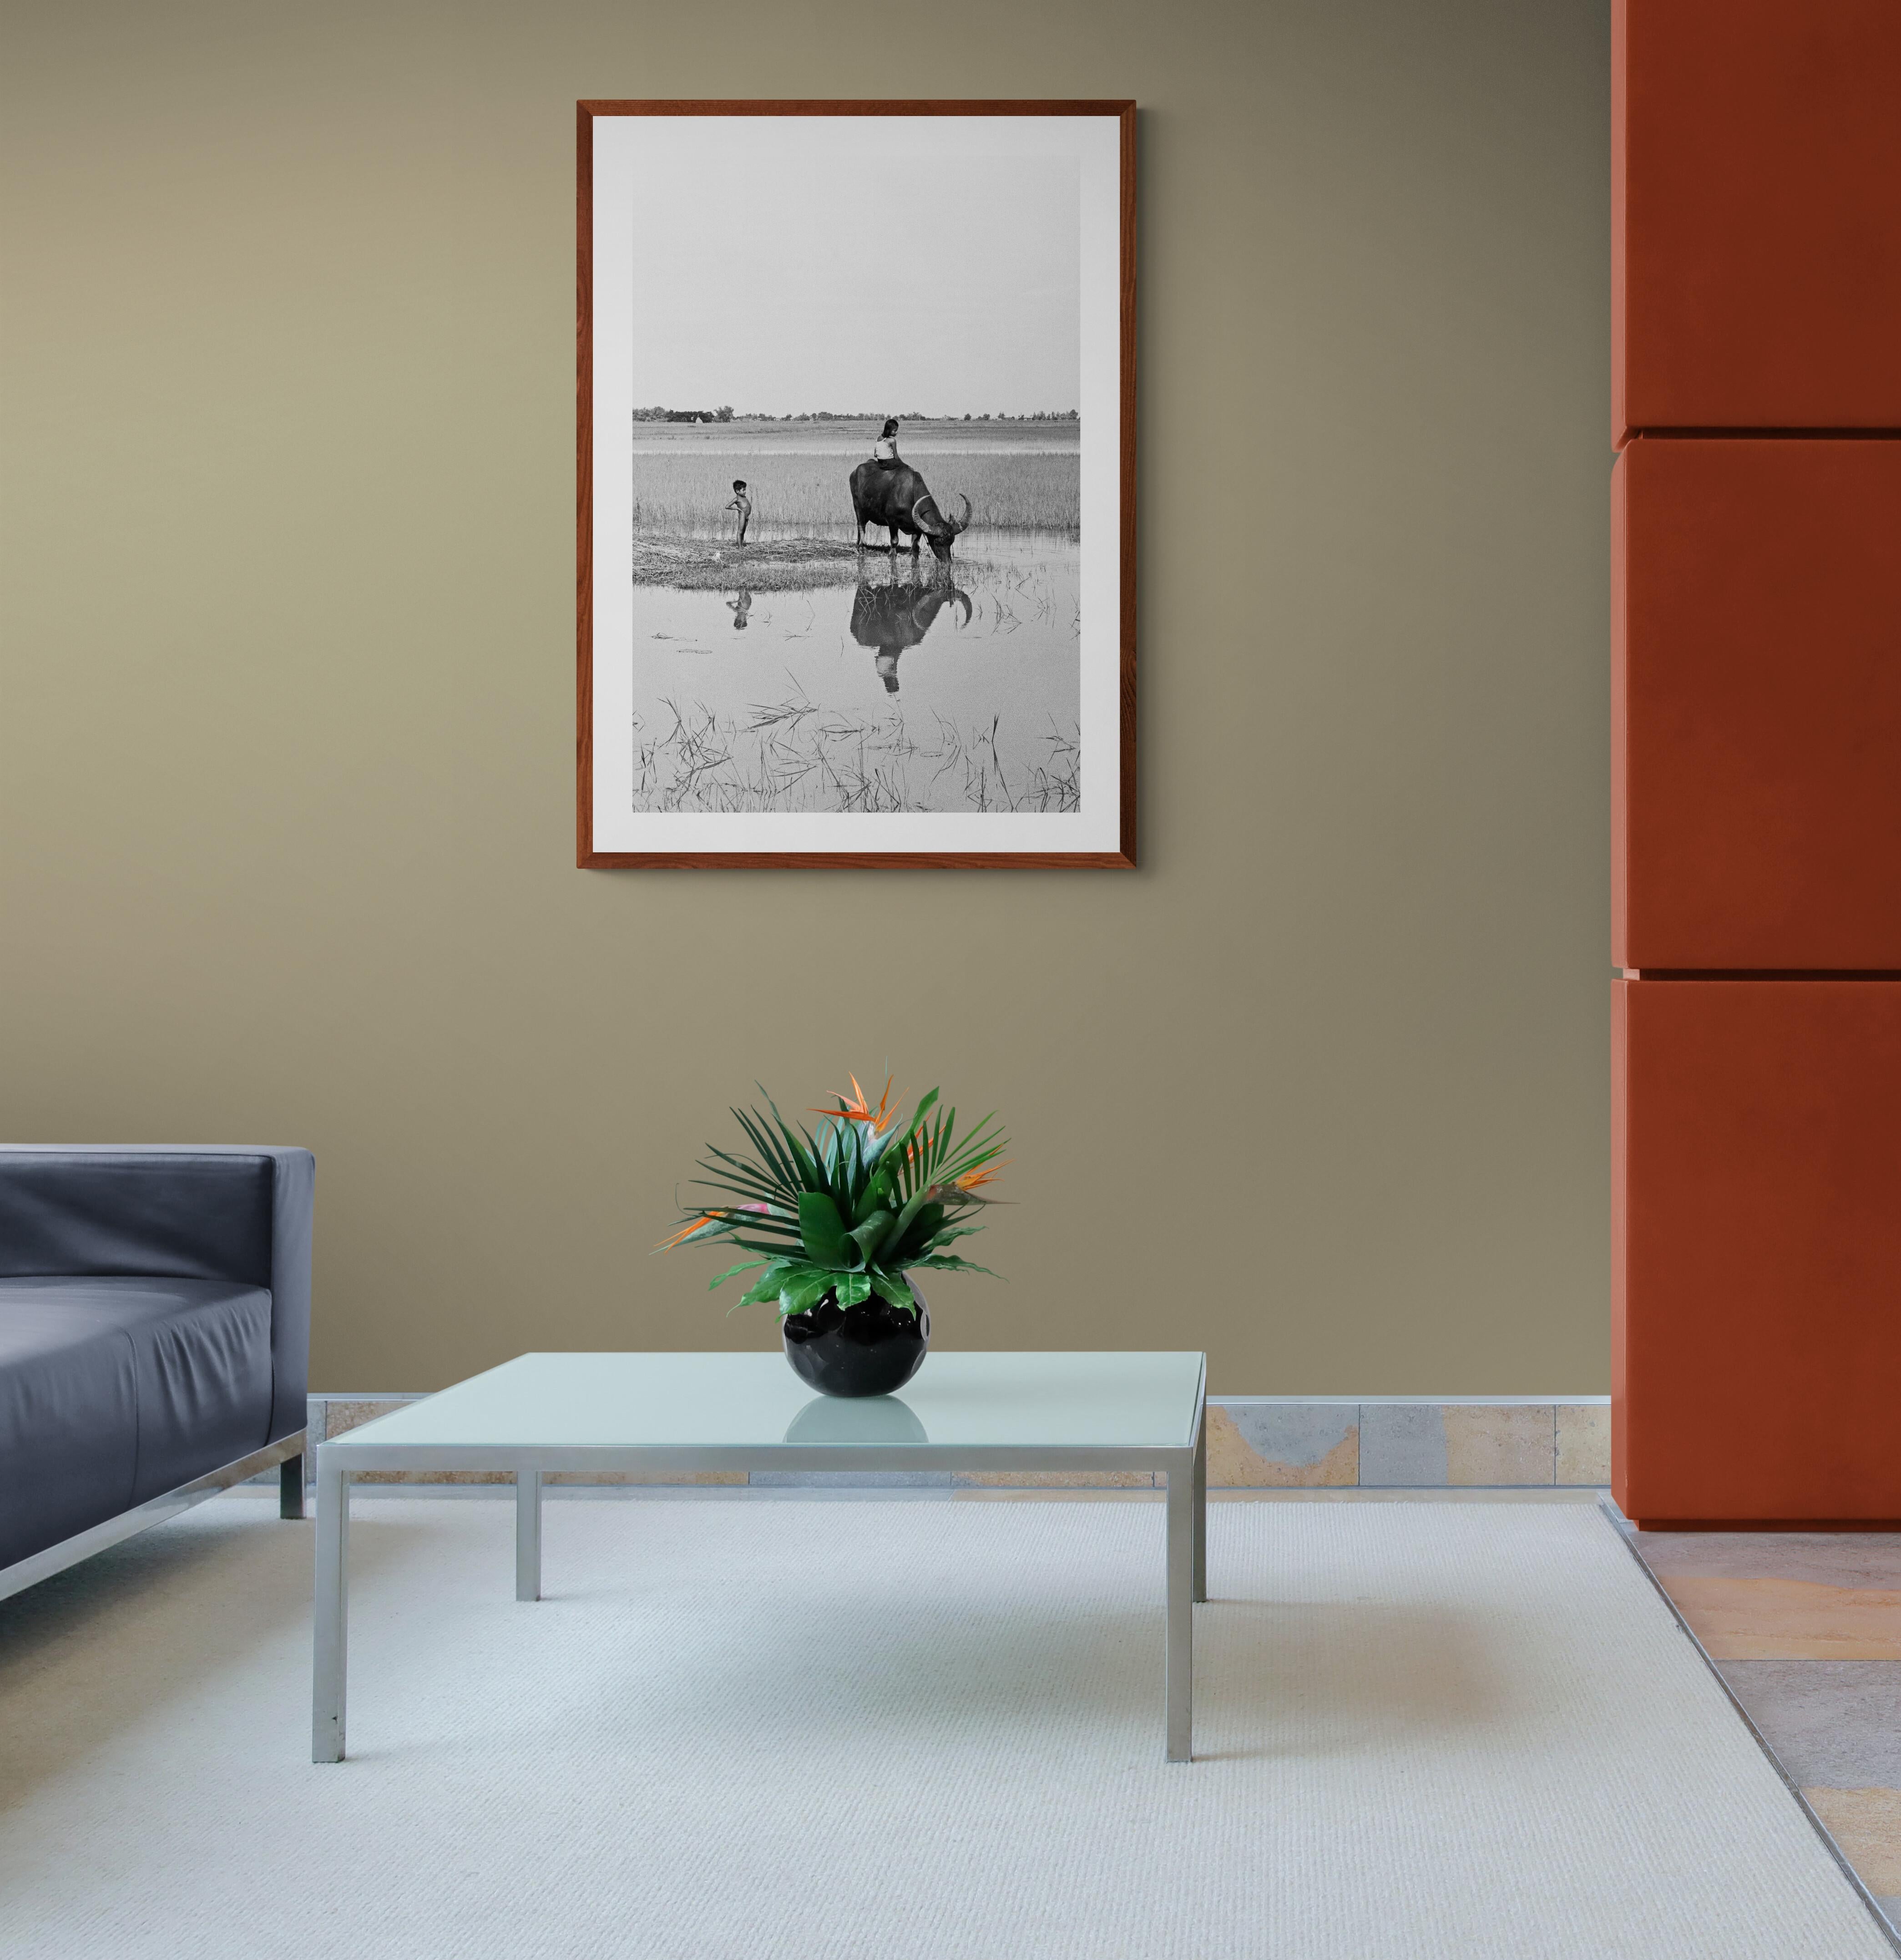 Artwork # 1 on 5 sold in limited edition in perfect condition 
This is a Minimalist framing & presentation of the artwork :
The Fine Art print on Baryta paper is mounted on a 2mm dibond plate and fixed by magnetic strips to the profile of the black